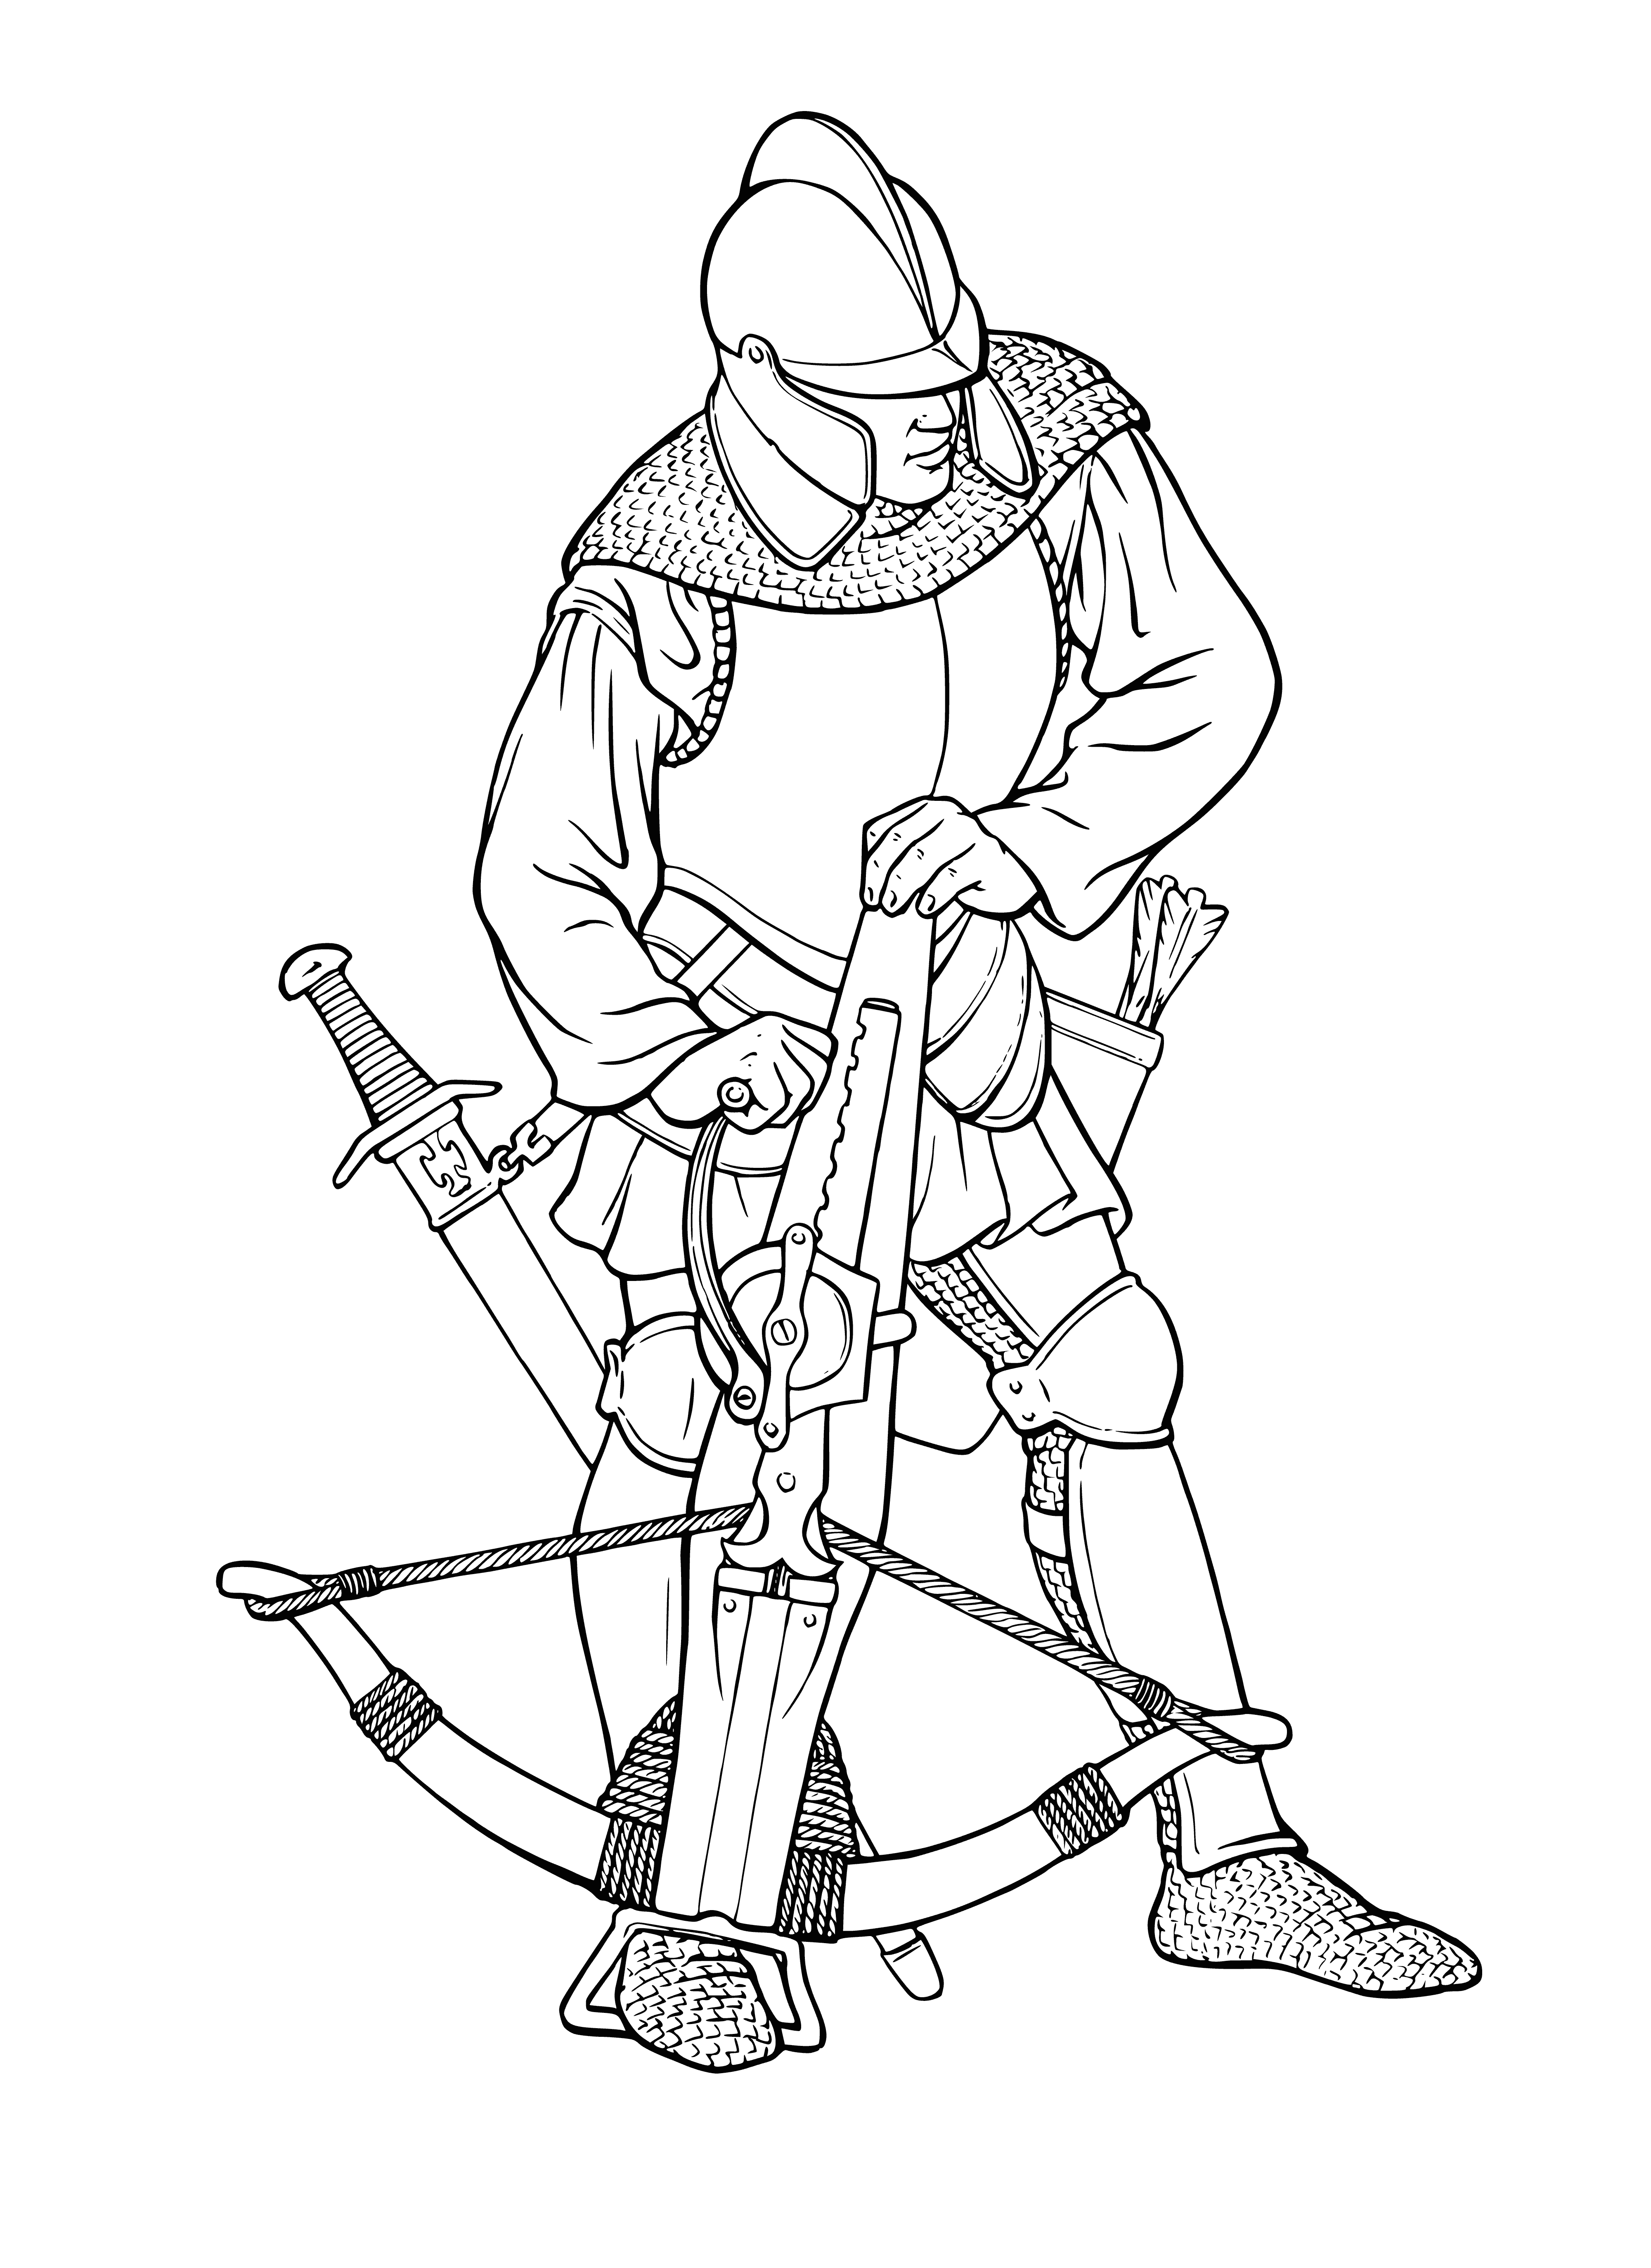 Warrior with a crossbow coloring page